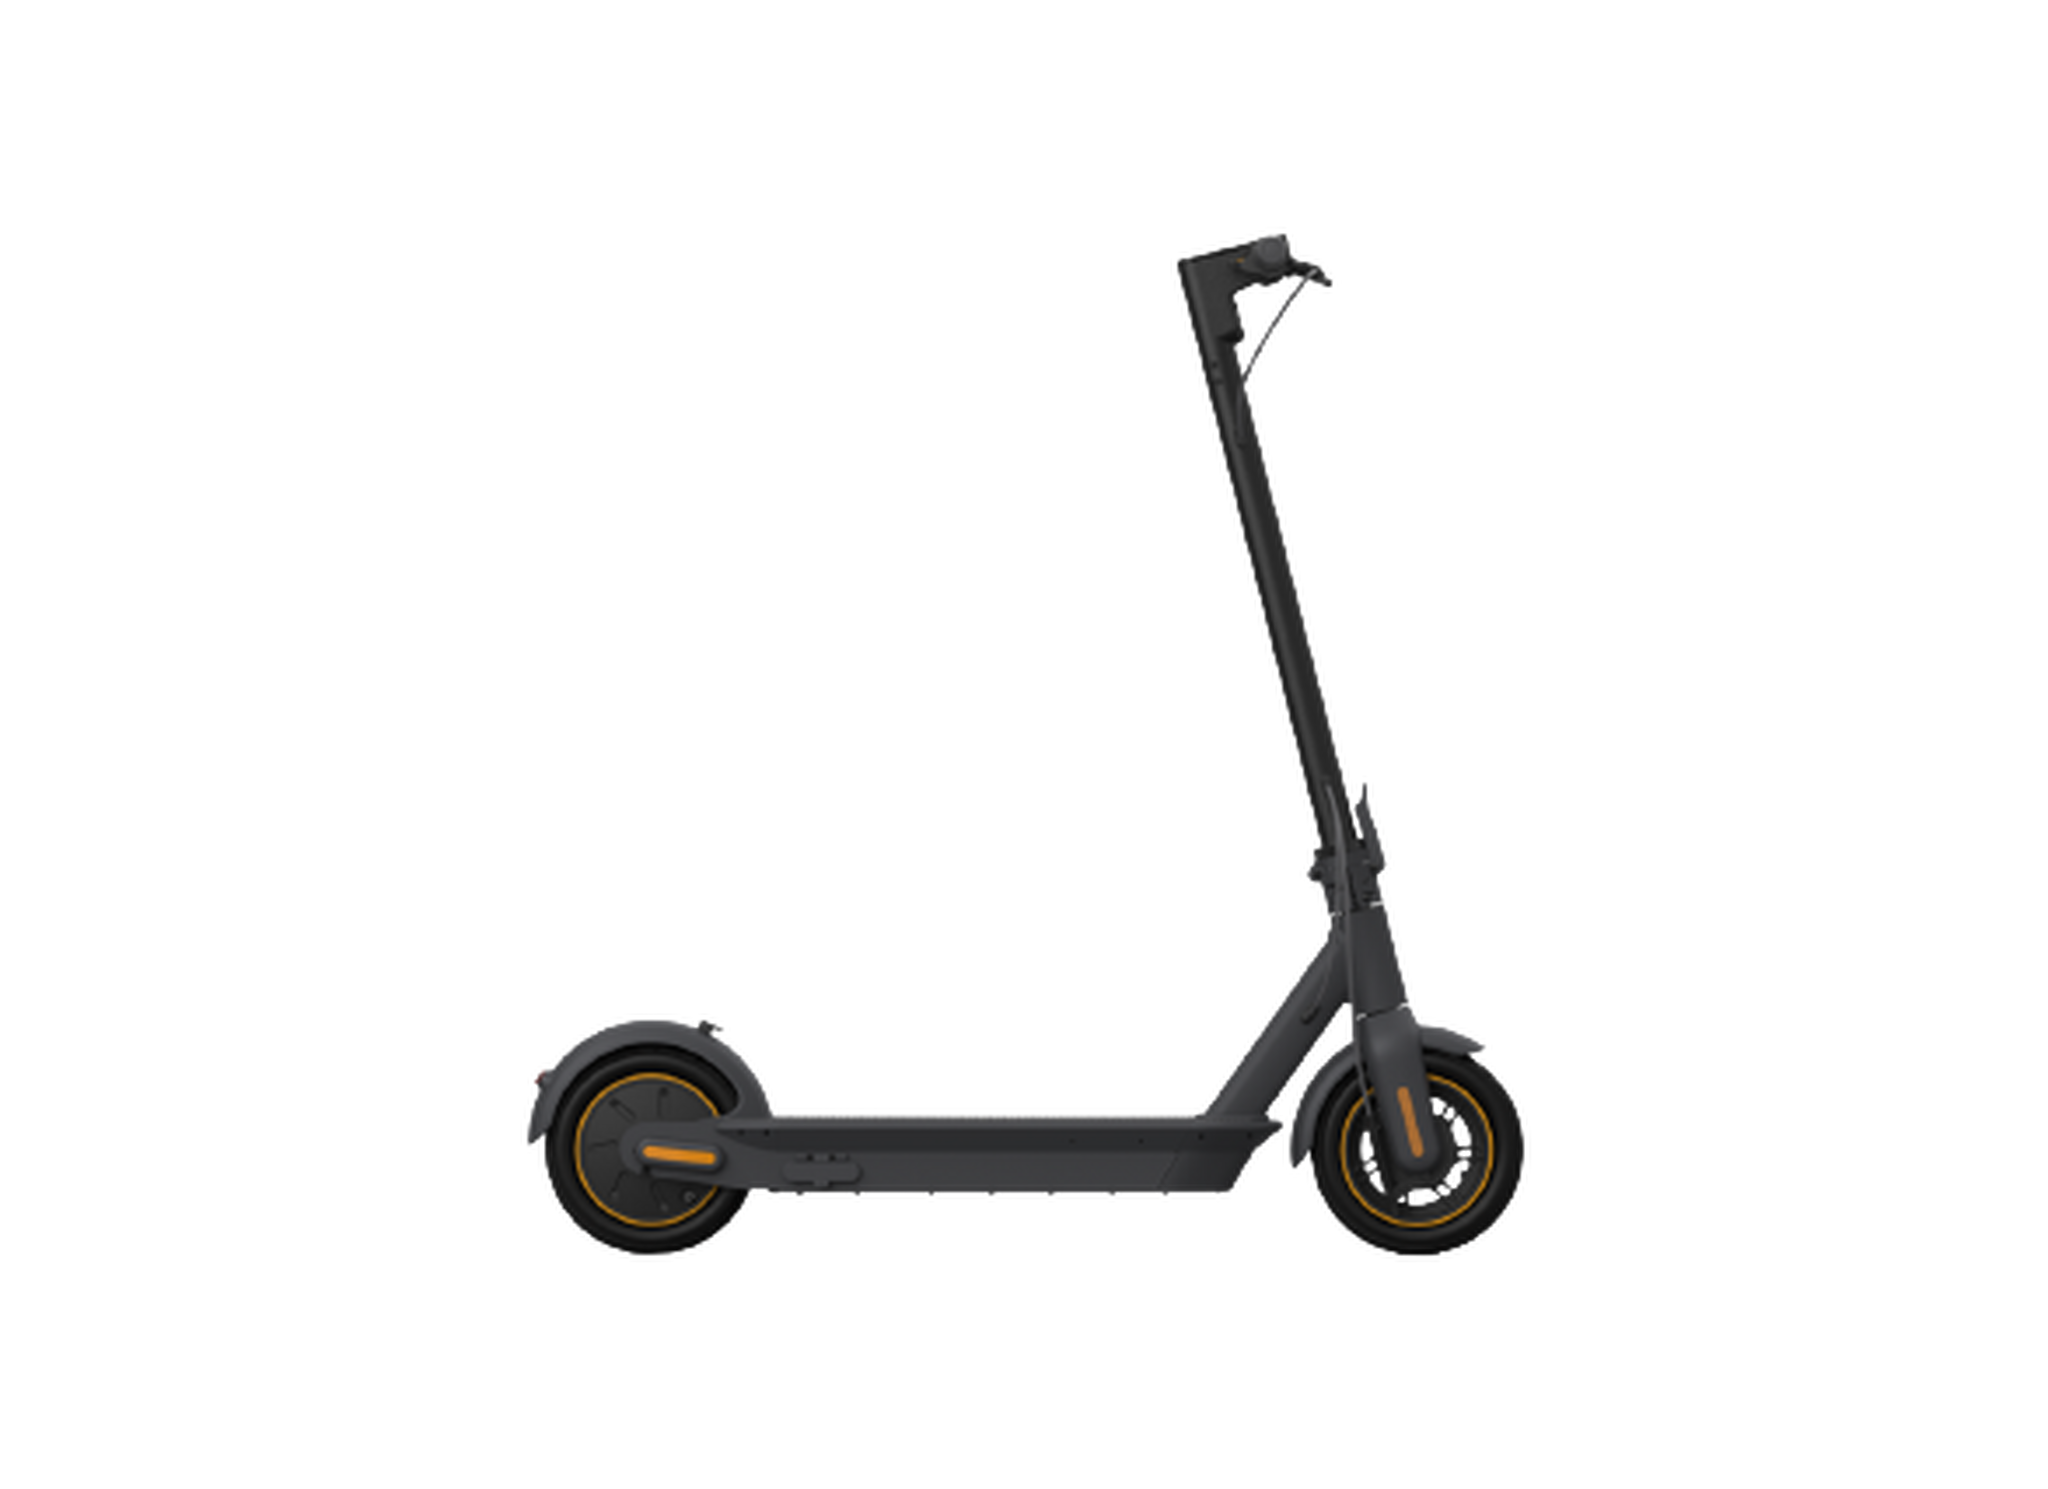 Segway Ninebot Kickscooter Max G30 Electric Scooter